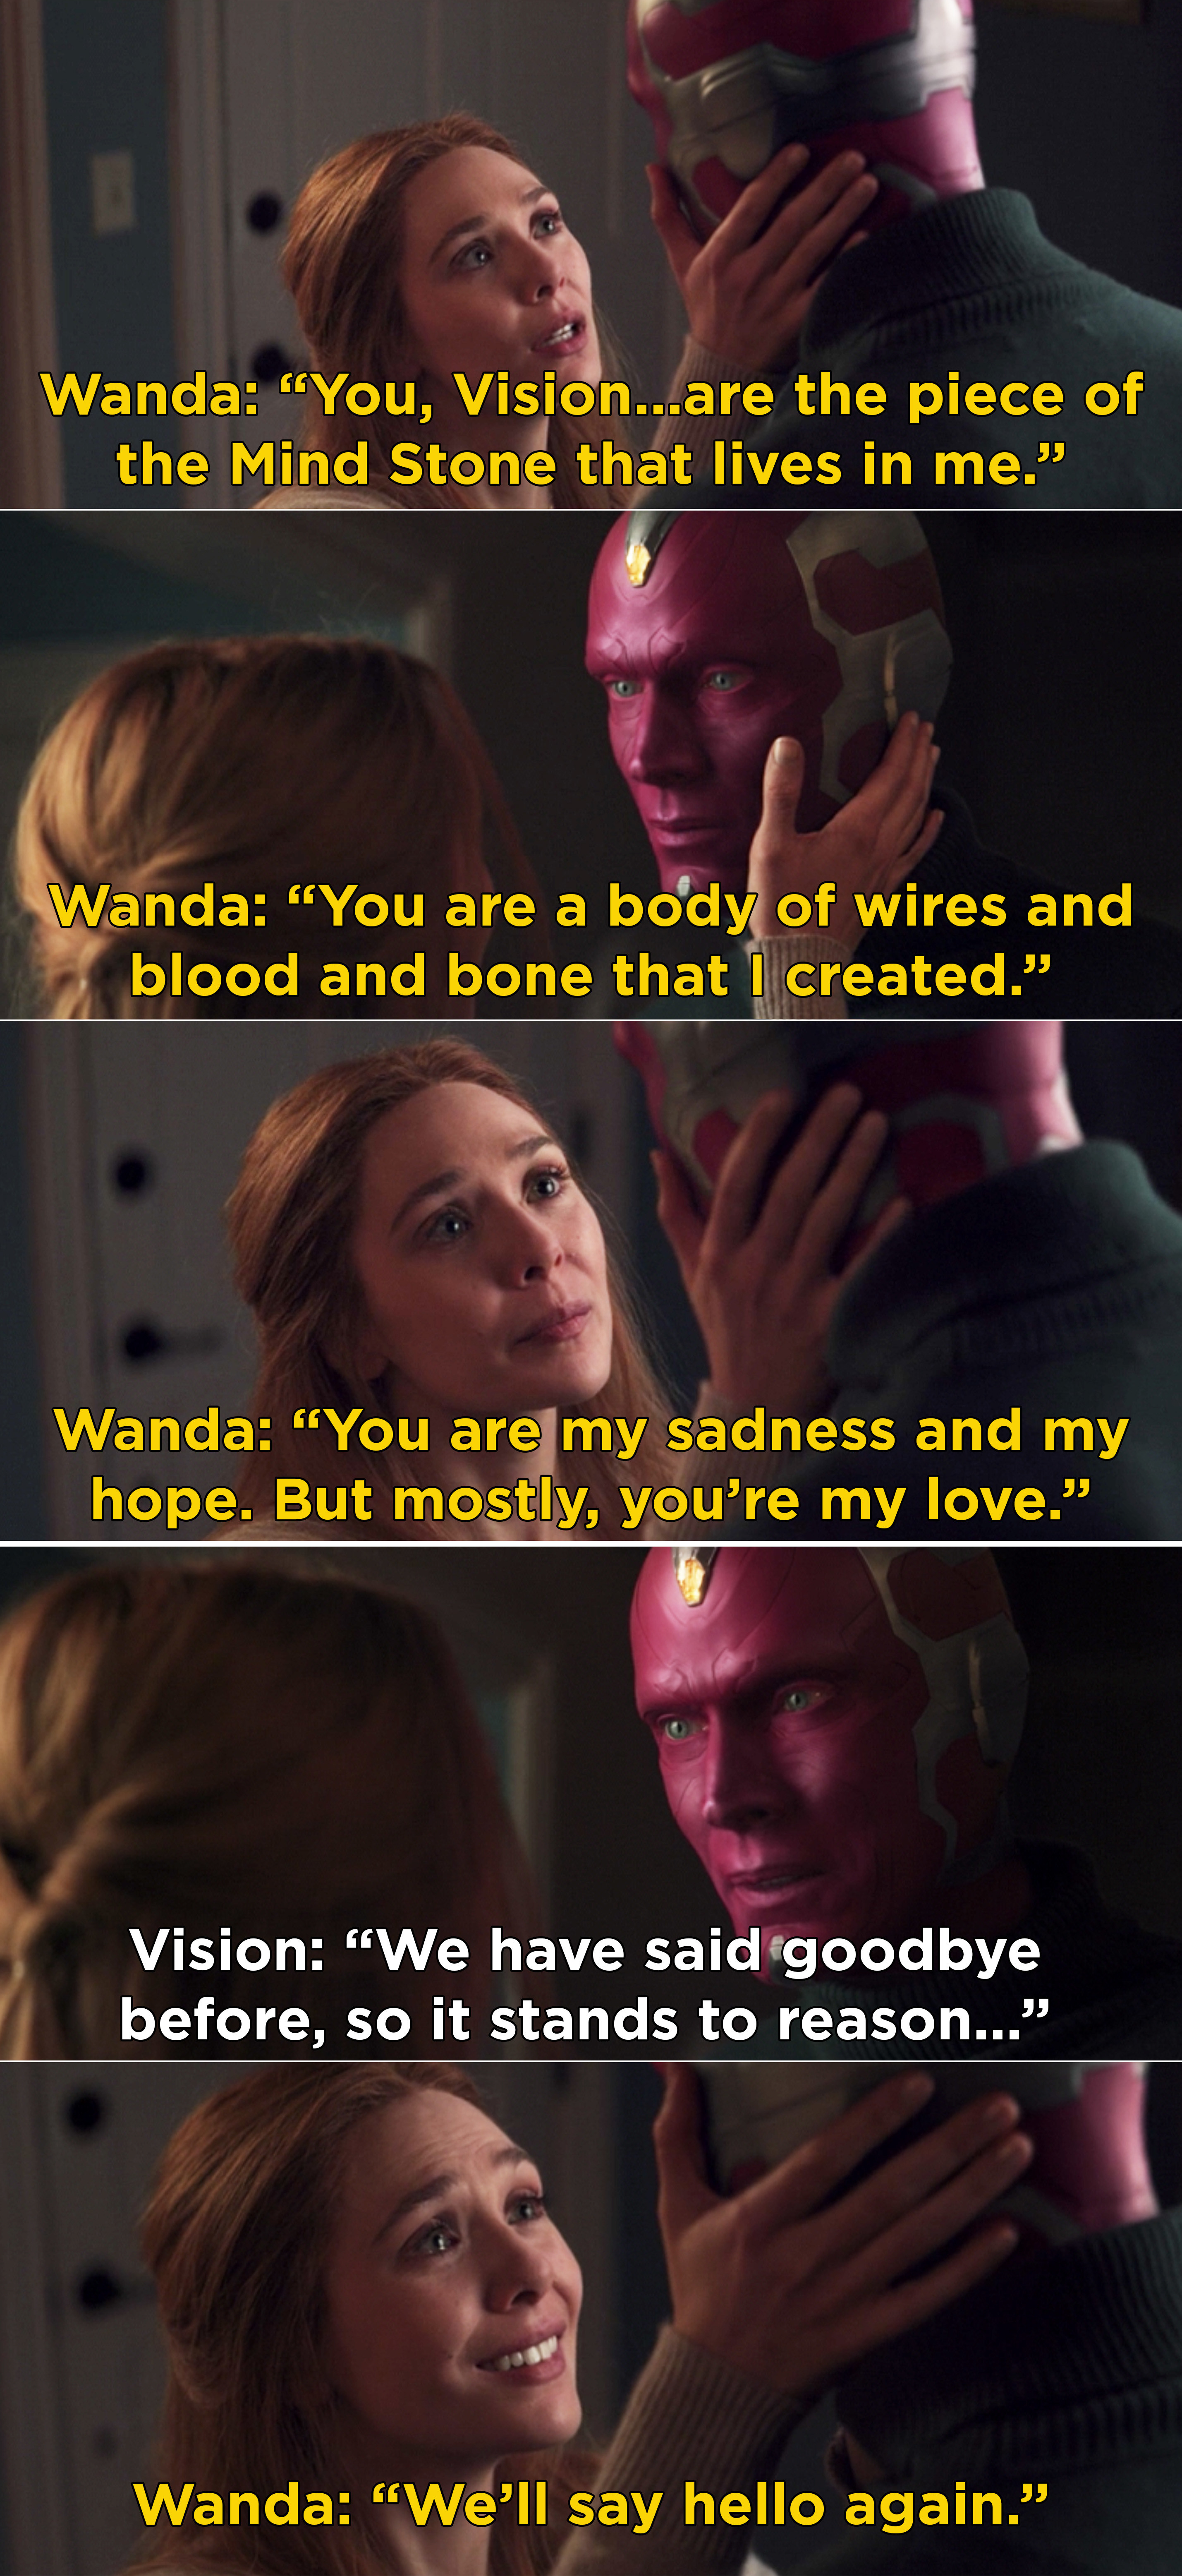 Wanda telling Vision that he&#x27;s the piece of the Mind Stone that lives in her and that they&#x27;ll say hello again